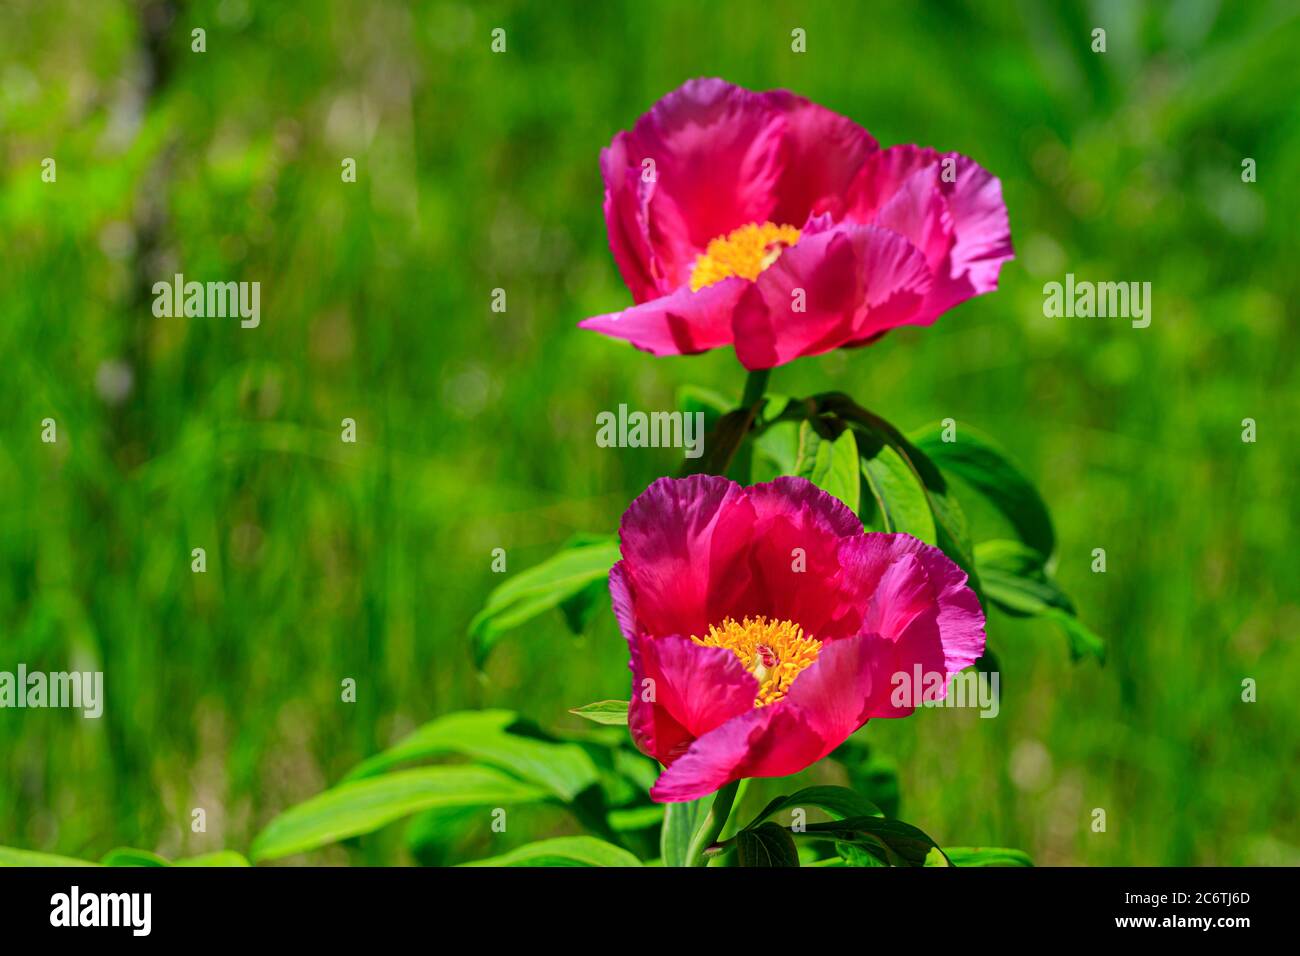 Pink red paeonia daurica flowers in green grass field Stock Photo